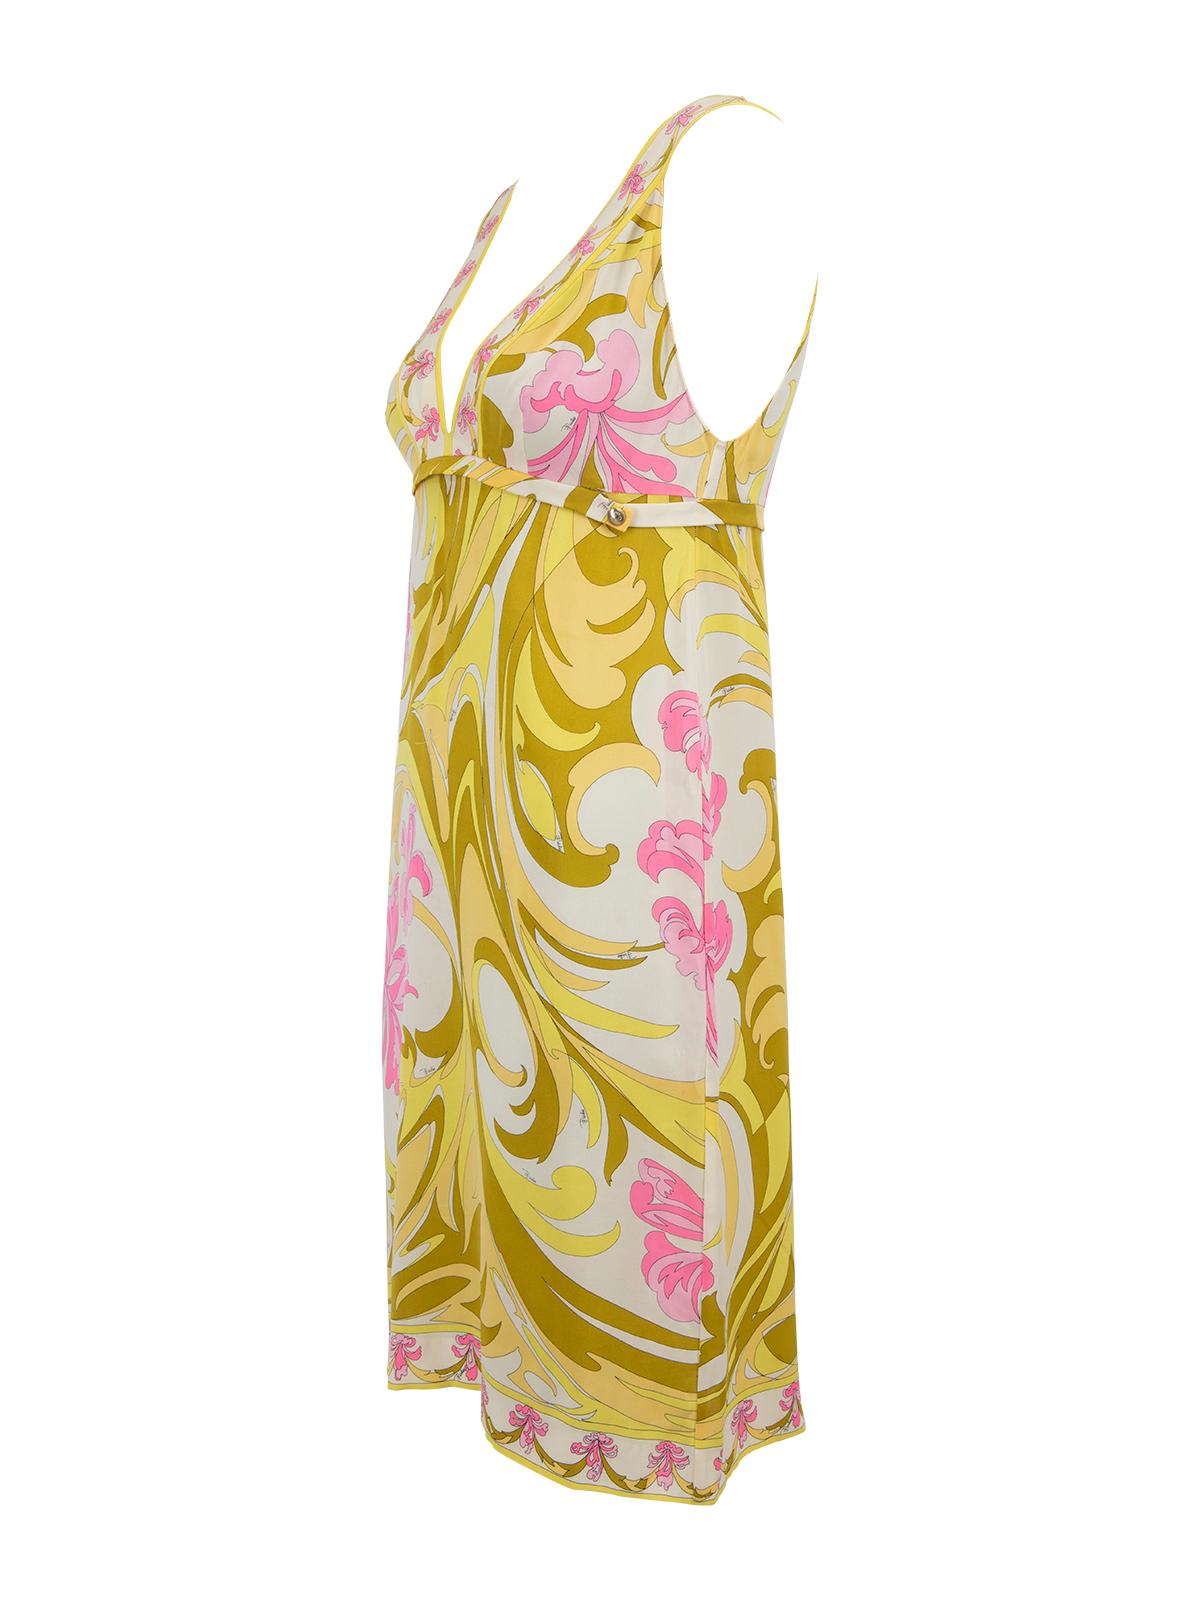 Pre-Loved Emilio Pucci Women's Floral Patterned Silk Sleeveless Dress 1